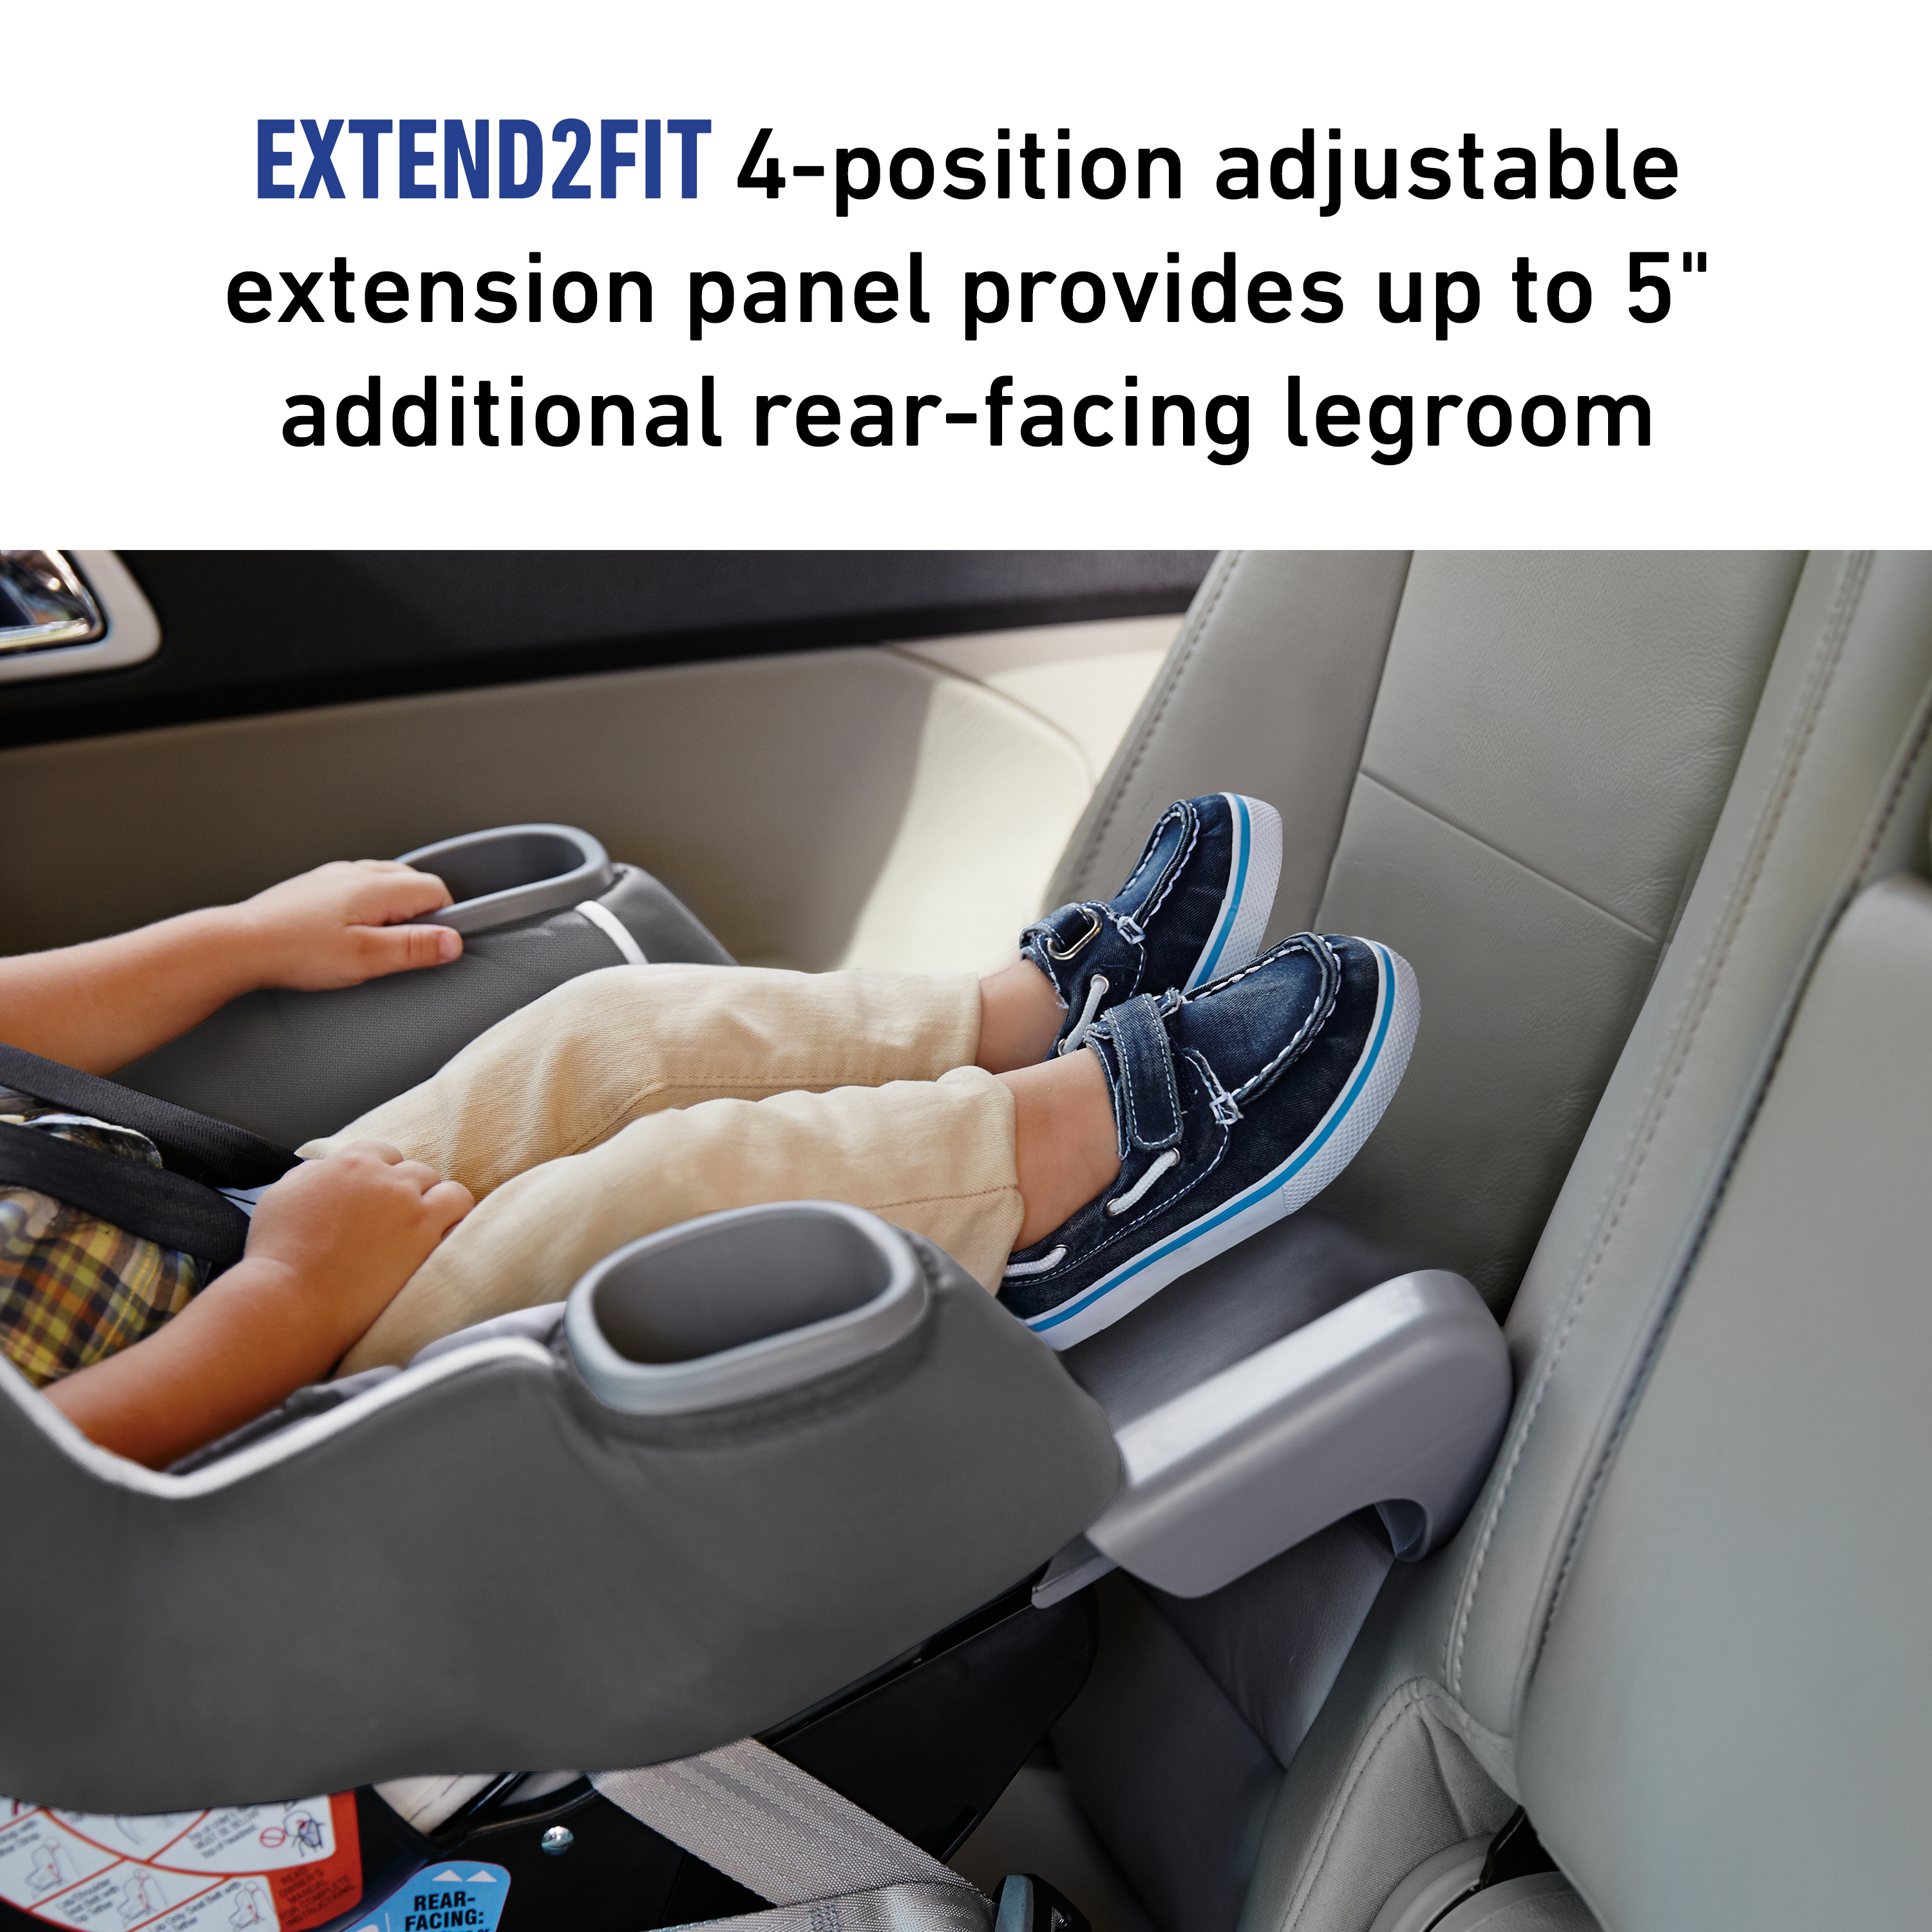 Graco Extend2Fit Convertible Car Seat, Ride Rear-Facing Longer, Gotham - image 4 of 8